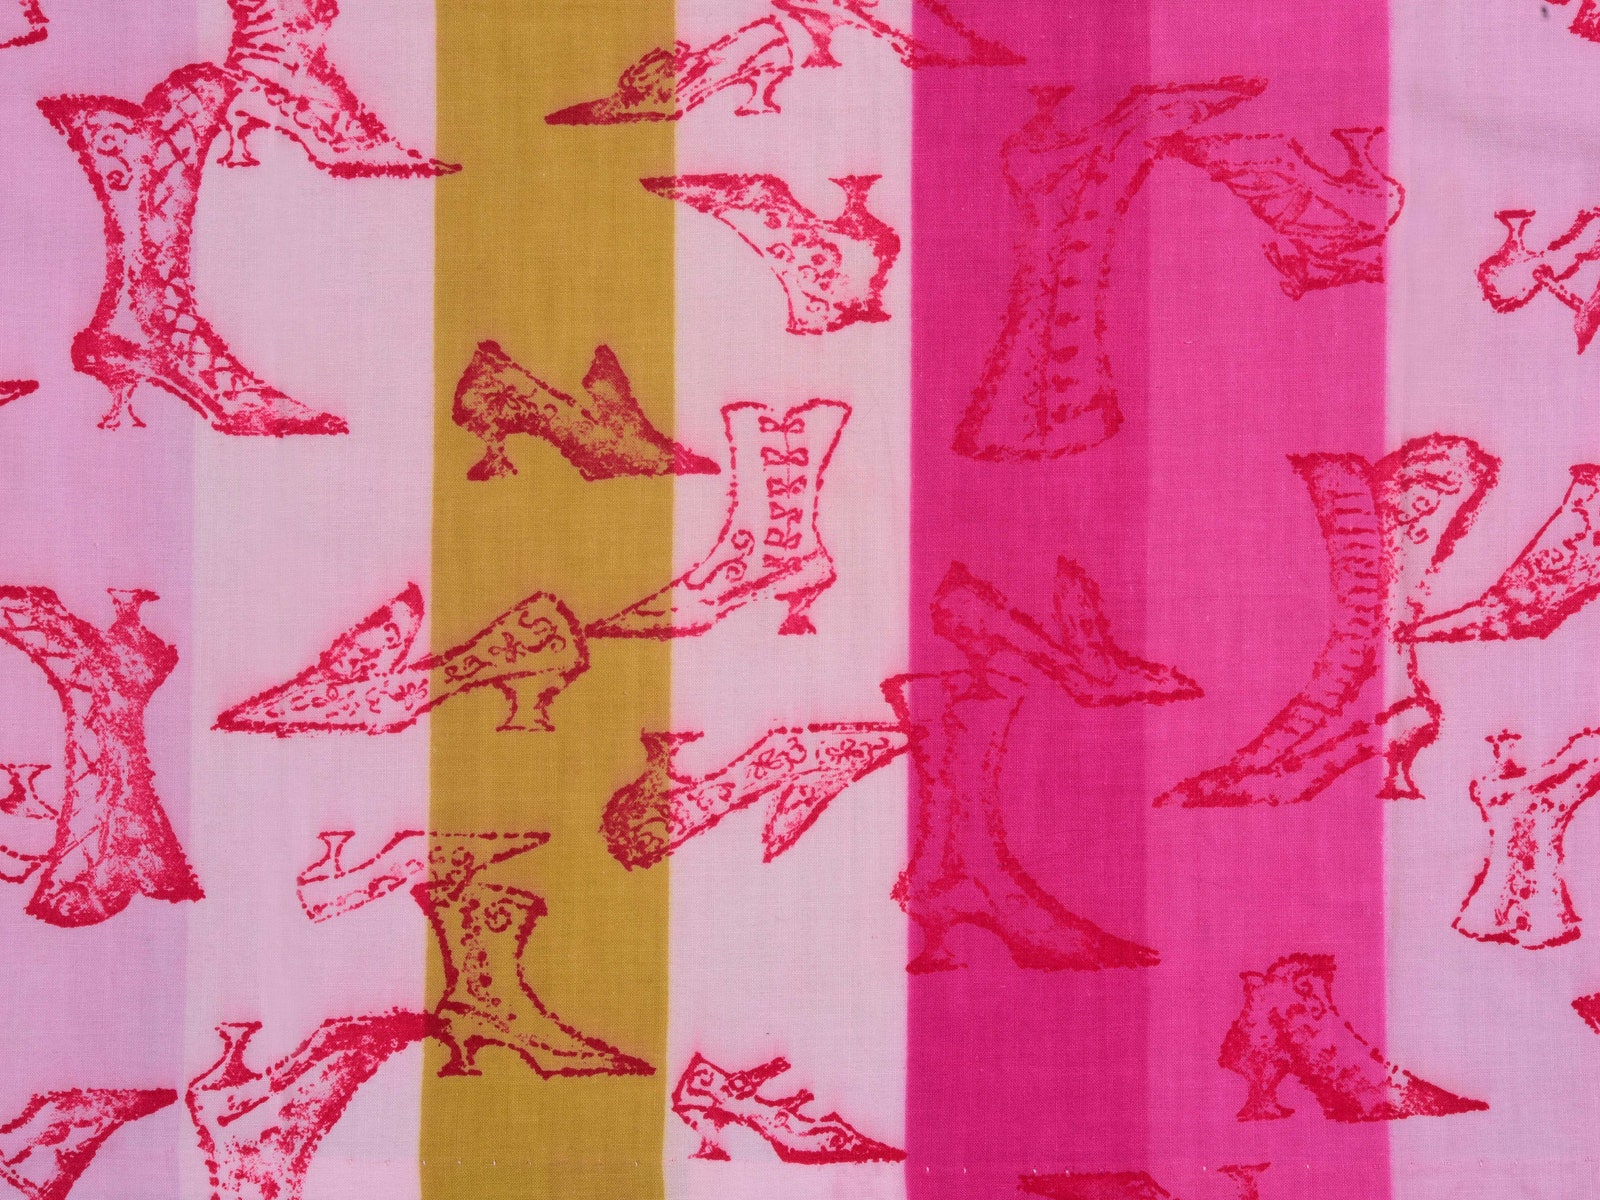 Andy Warhol did textiles, too? A new exhibition previews the Pop Art maestro’s prints